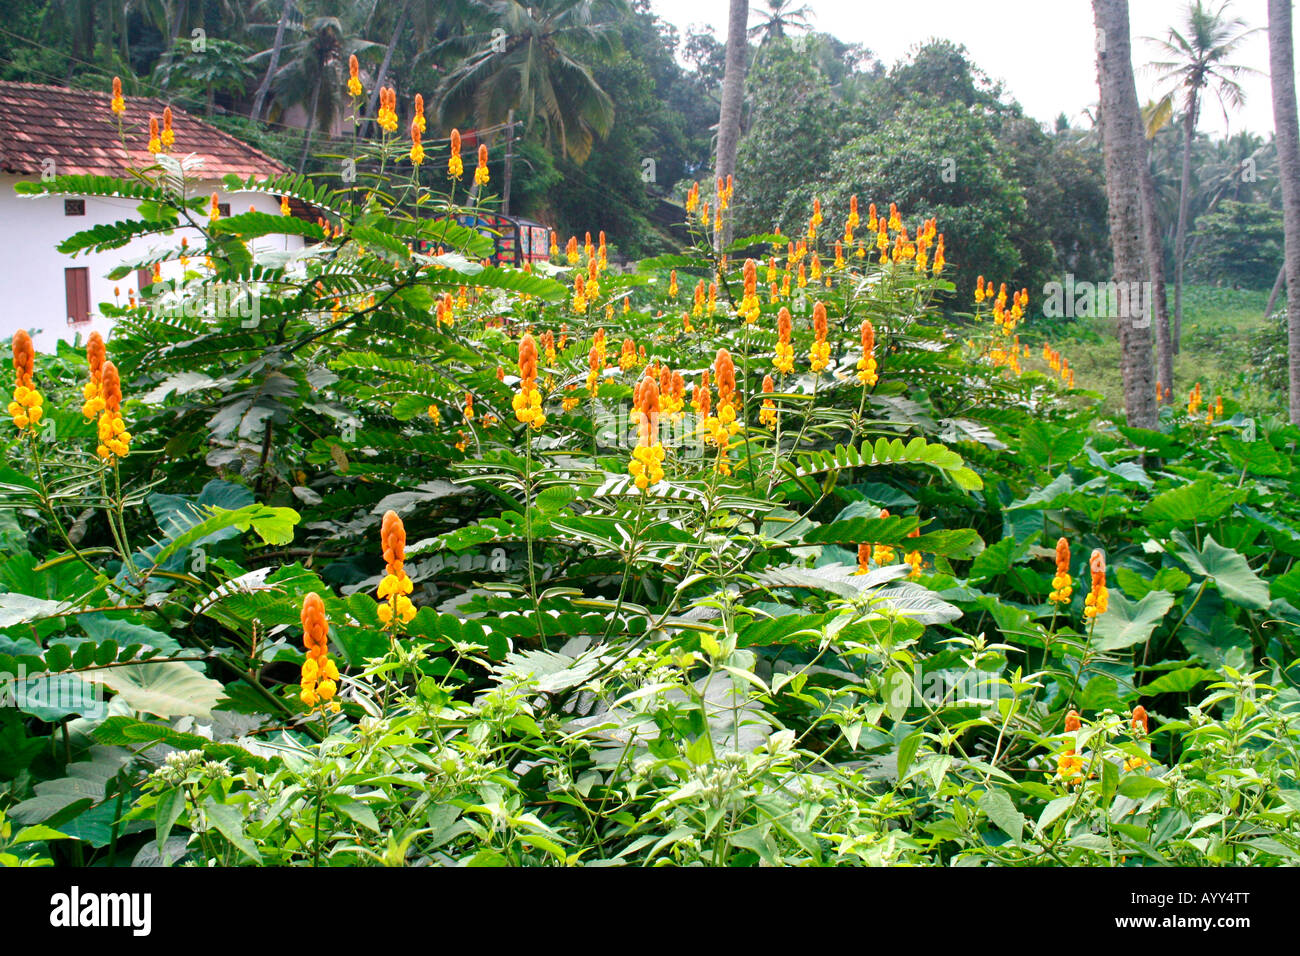 Tropical shrub with intricately detailed yellow orange flowers growing wild and untended in the backyard of an old house Stock Photo